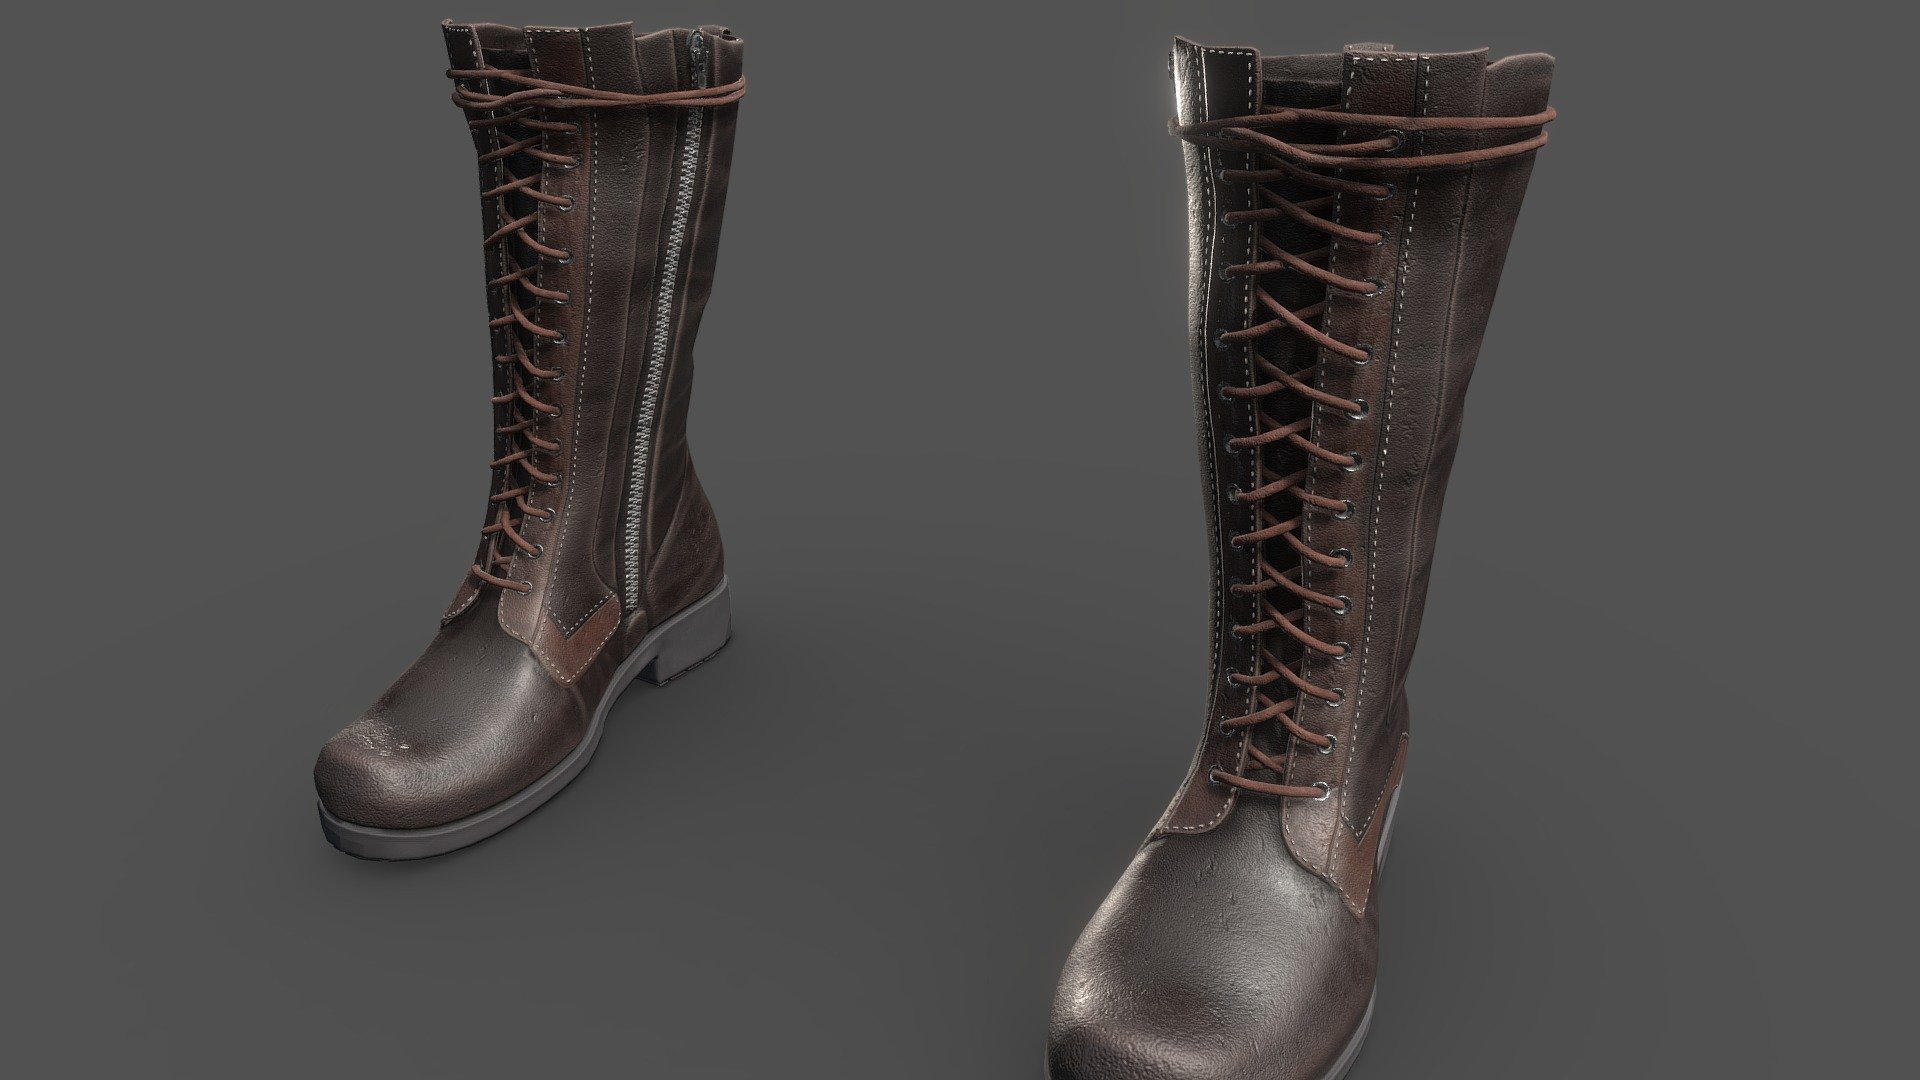 Another asset of my character in progress.
Soon a wip of the whole character will be available.

Created with blender, zbrush &amp; substance painter - Leather Boots - 3D model by Alex (@banzai502) 3d model